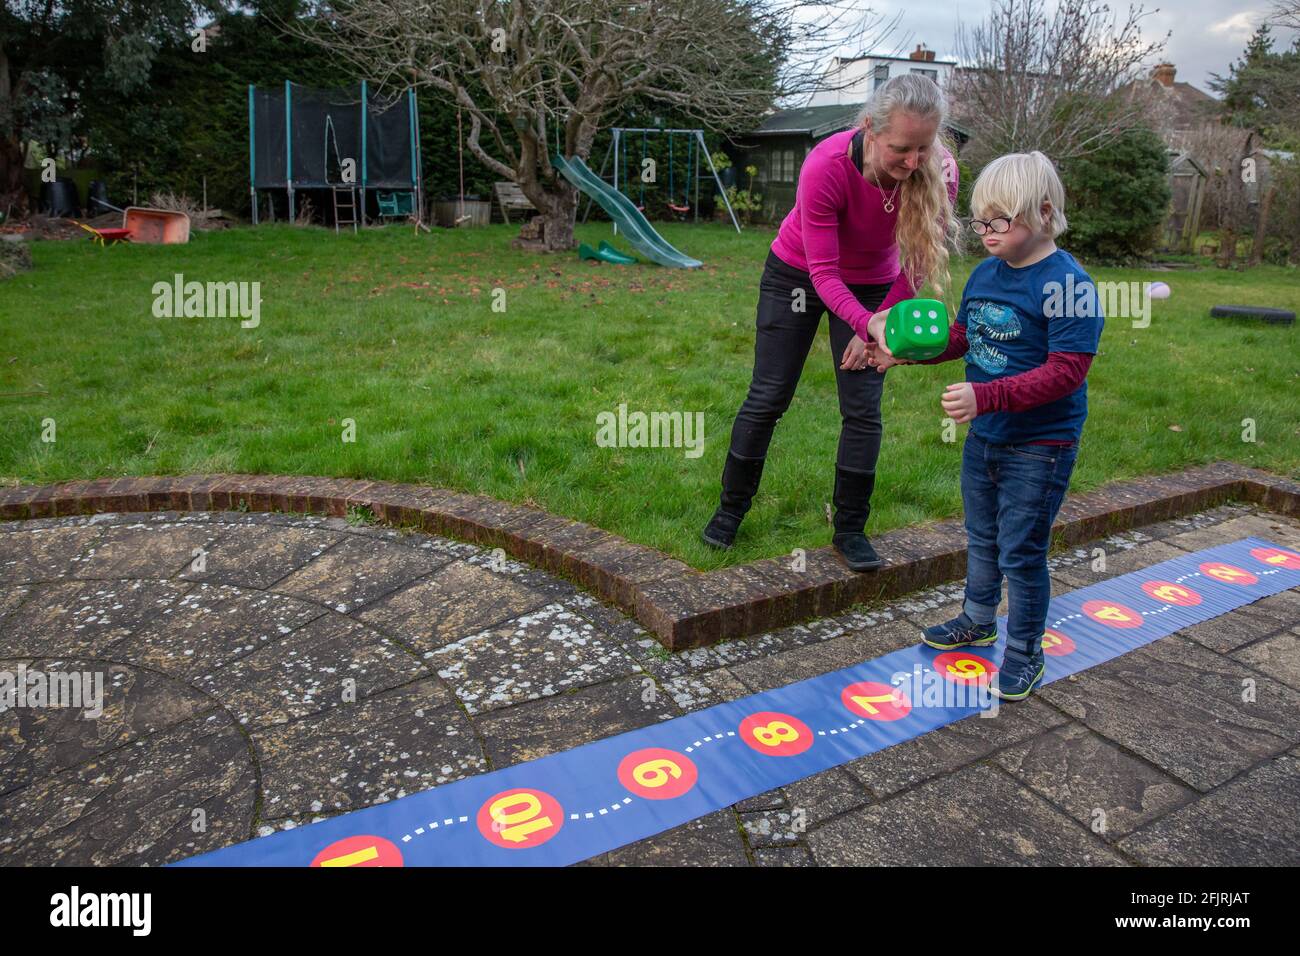 Karen McGuigan, the Maths Mum rewriting the curriculum for kids who learn differently at home with her son Lance, England, United Kingdom Stock Photo